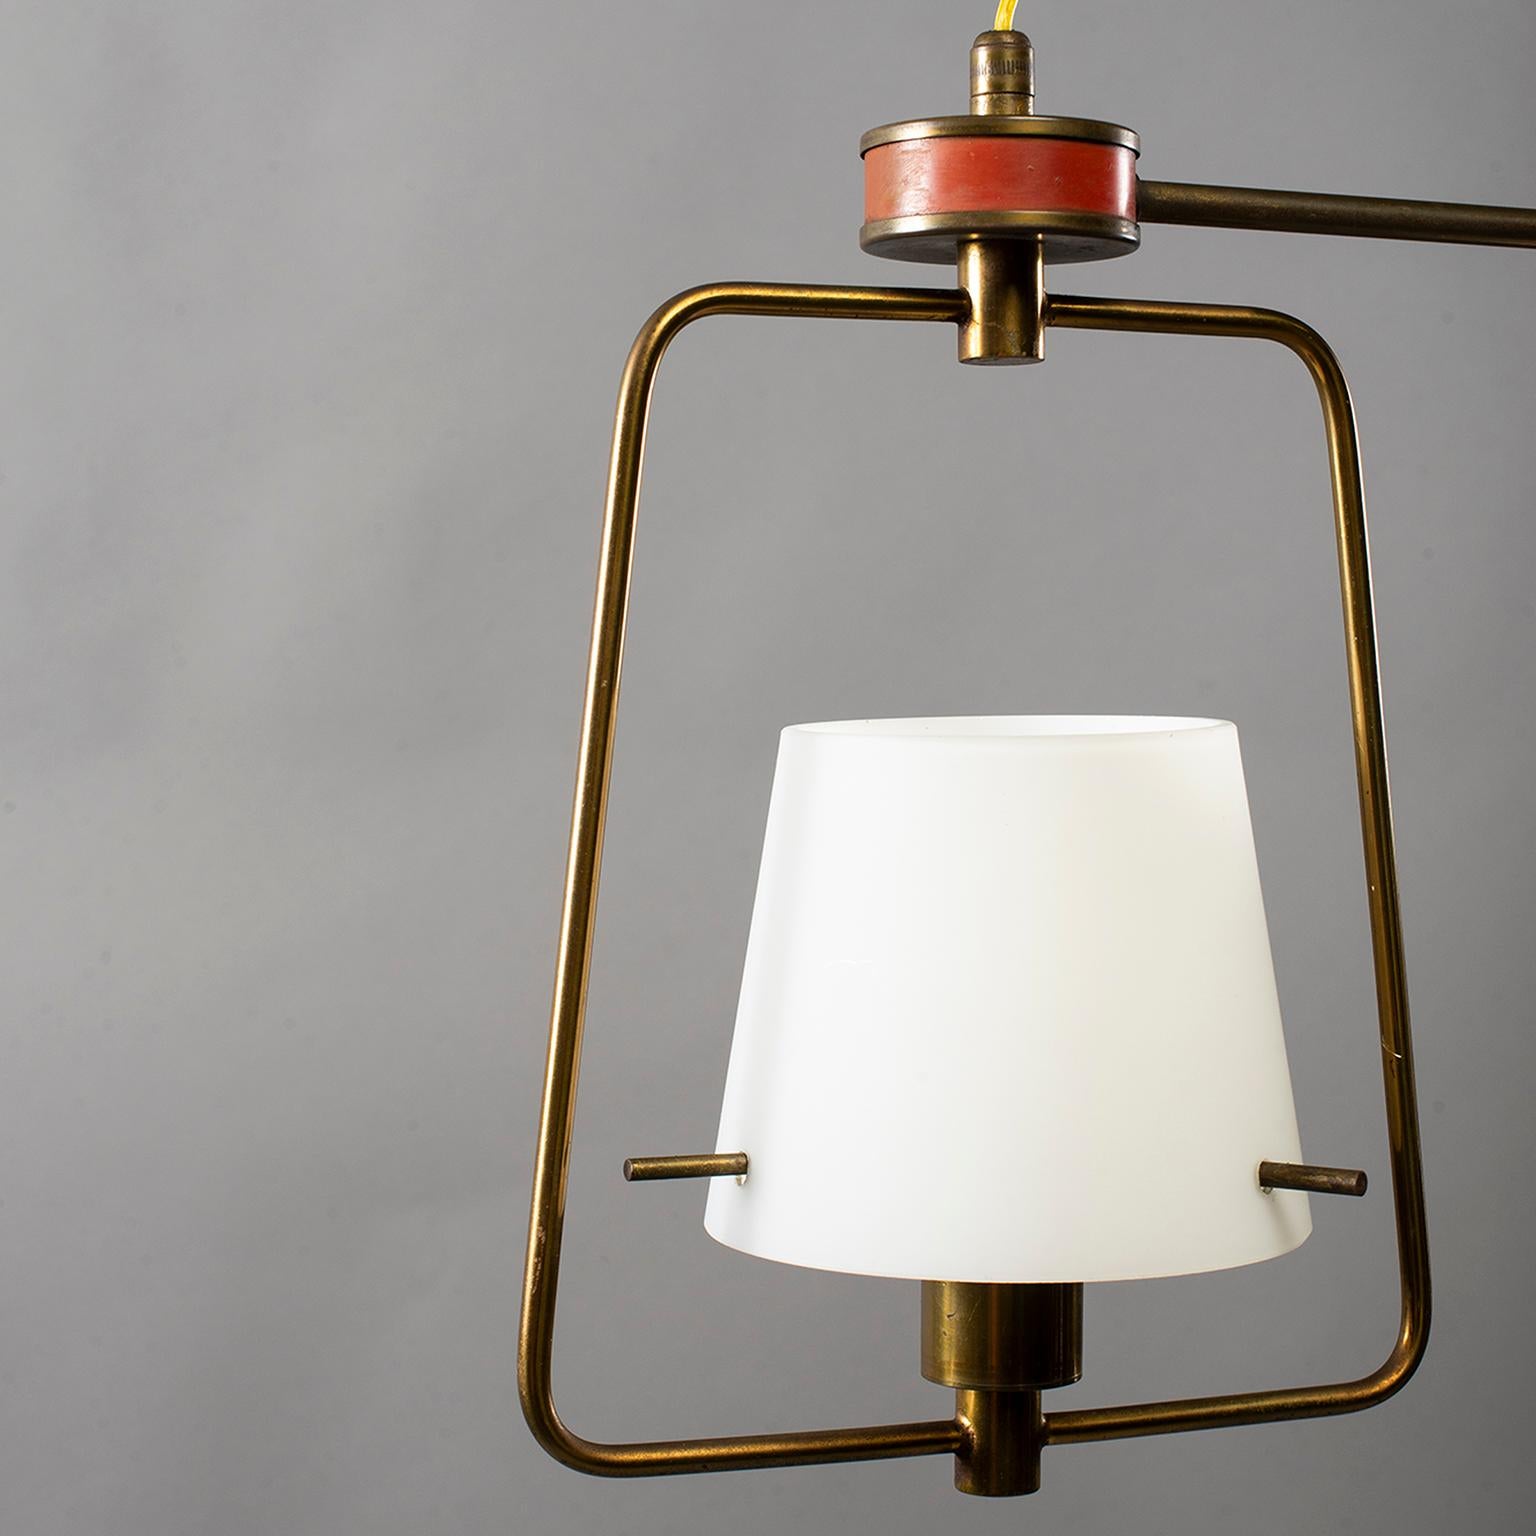 Italian Stilnovo Three-Light Fixture with Glass Shades and Brass Fittings For Sale